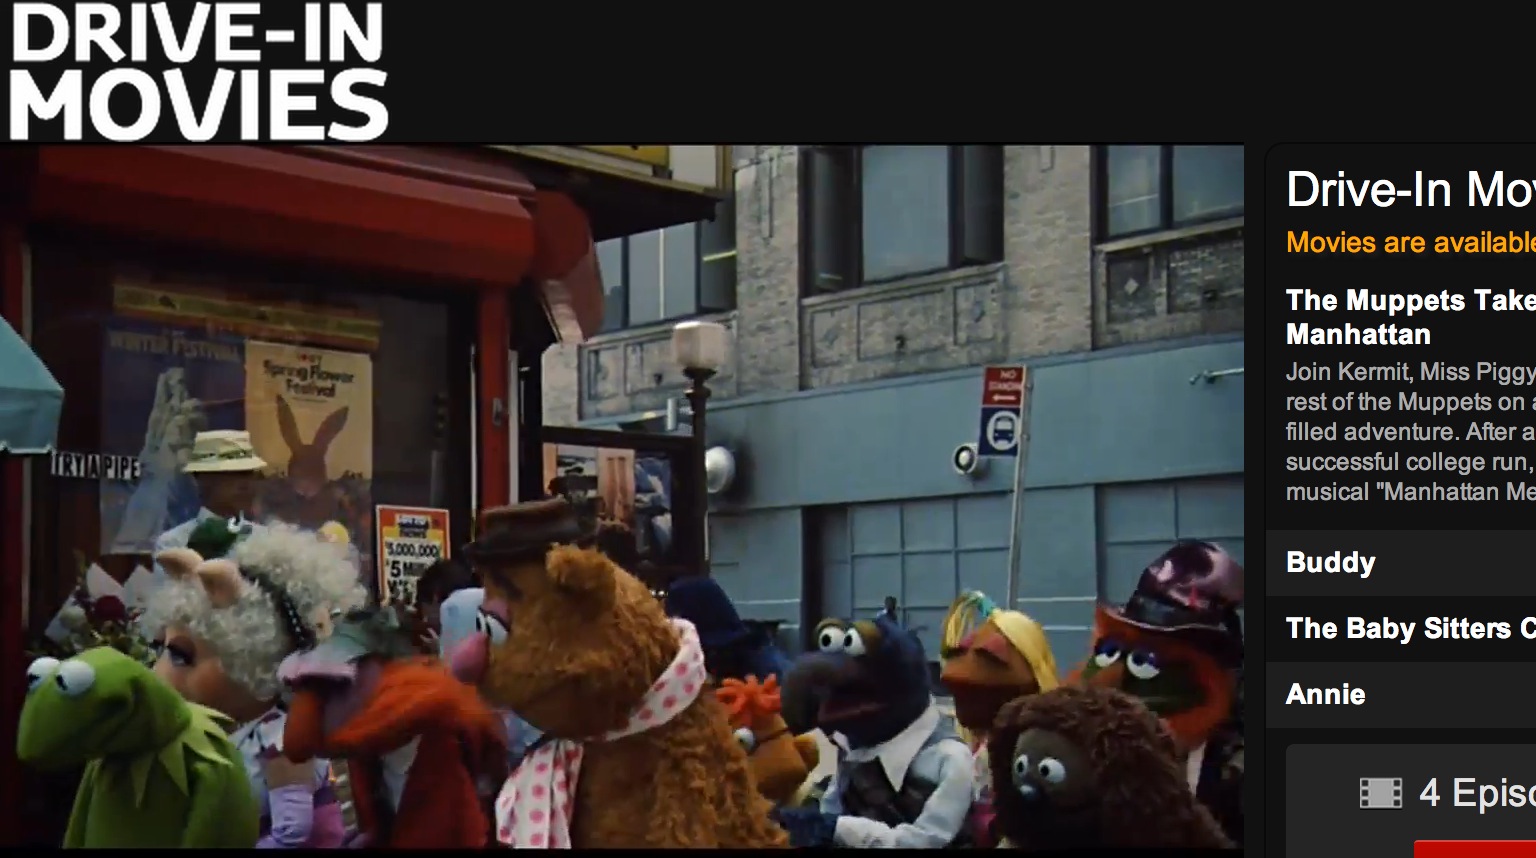   The Muppets Takes Manhatten is one of the family movies available for a limited time on Plus7  image - Yahoo7 